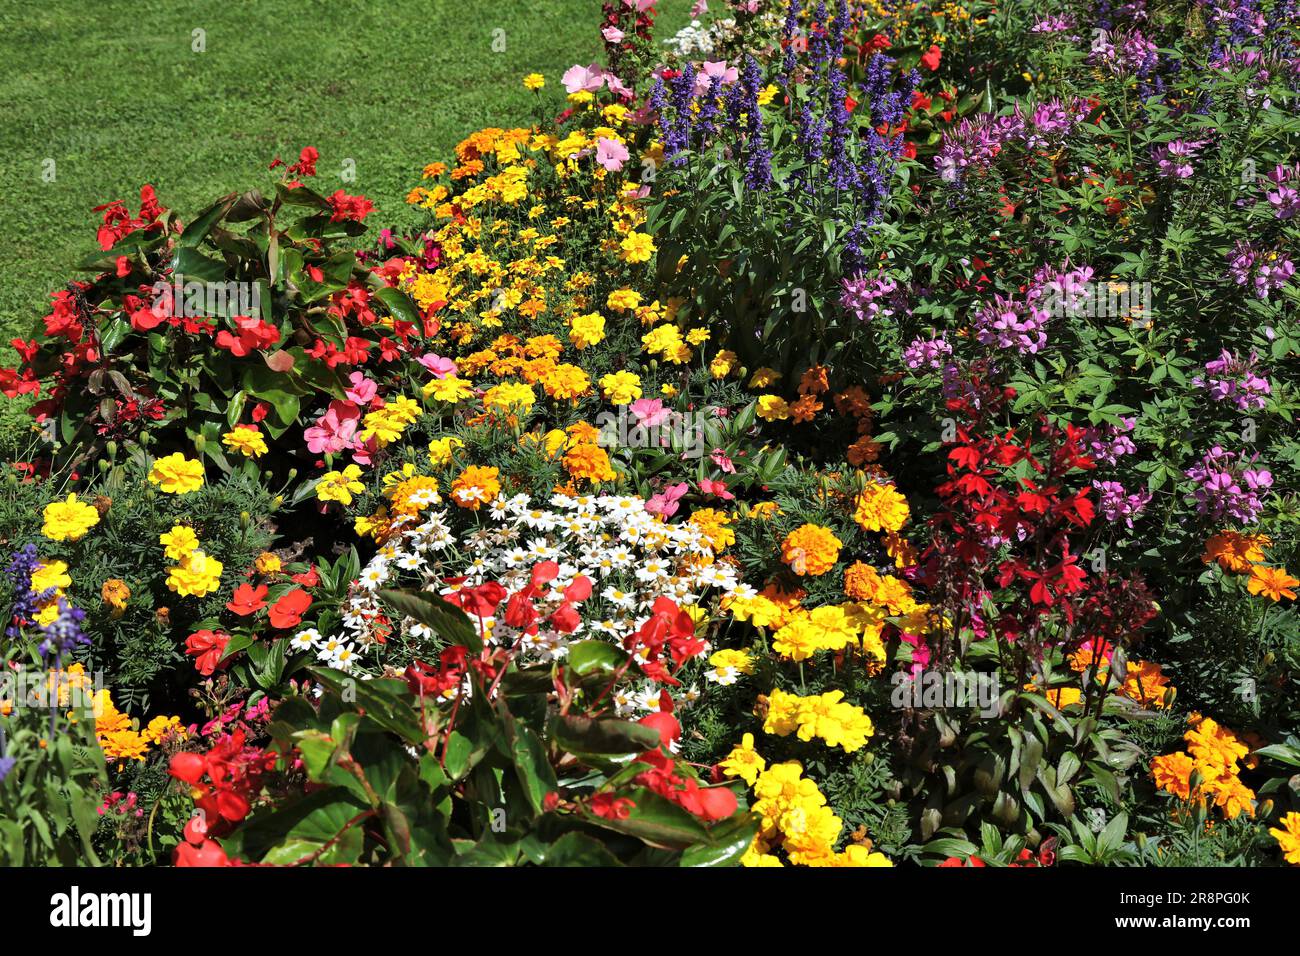 City flowerbed in Spittal and der Drau in Austria. Mixed species flower patch with marigold, begonia, Cleome hassleriana (Spider flower) and Salvia fa Stock Photo